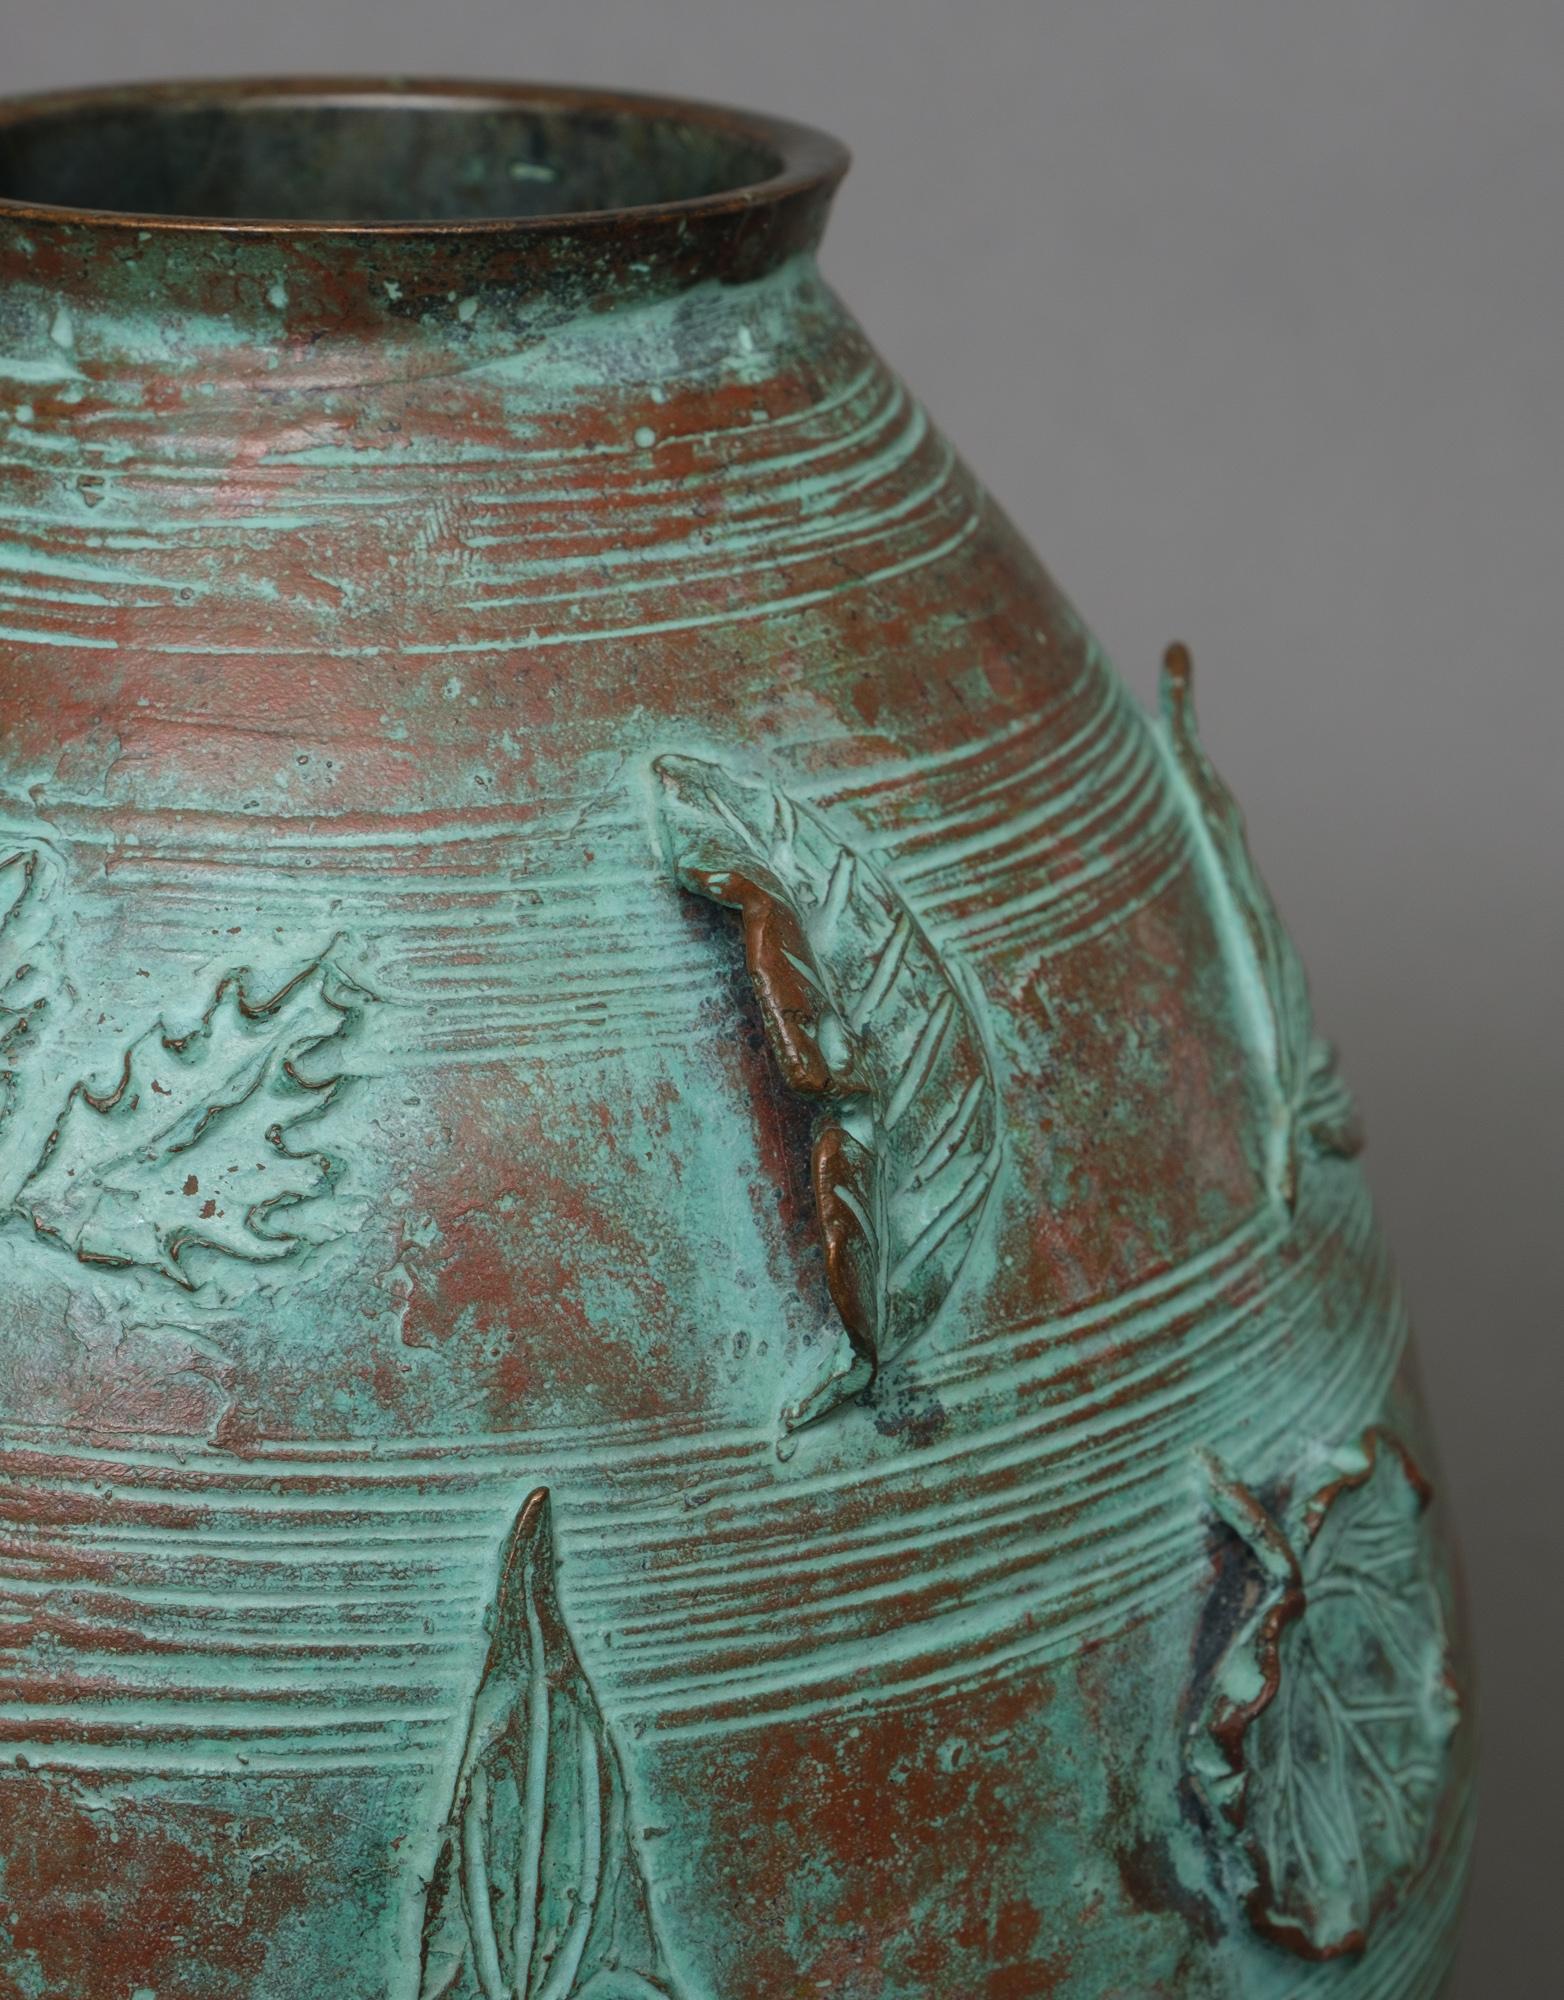 Patinated Bronze Ovoid Vase with High Relief Leaf Design by Nitten Artist Hirai Noboru 平井昇 For Sale